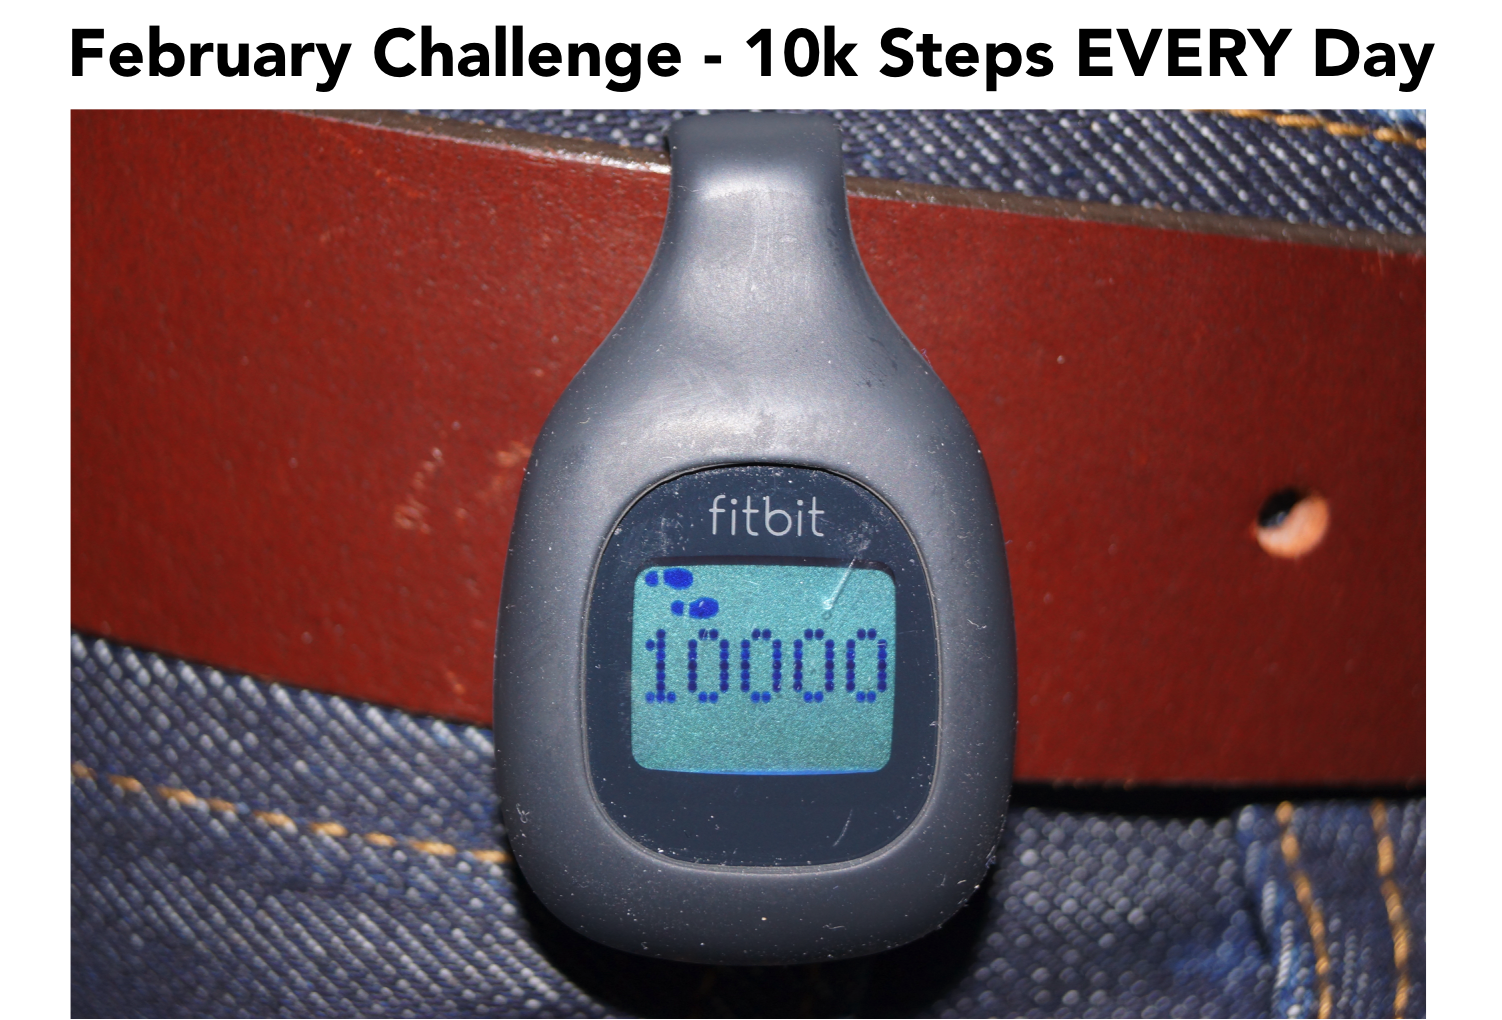 February Challenge Fitbit 10,000 steps every day